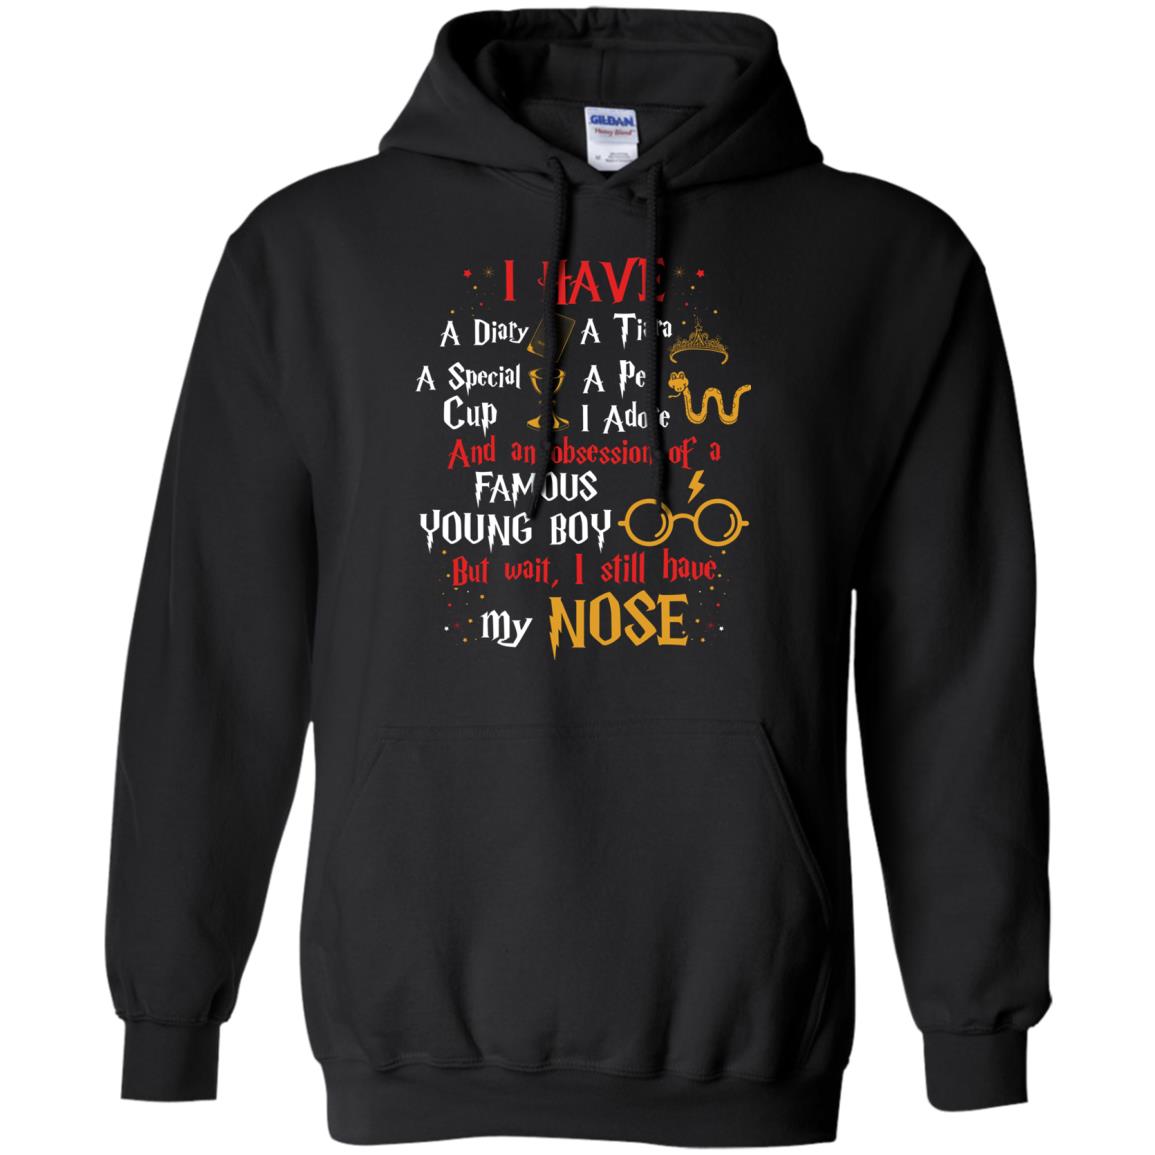 I Have A Diary, A Tiara, A Special Cup, A Pet I Adore And An Obsession Of A Famous Young Boy Harry Potter Fan T-shirtG185 Gildan Pullover Hoodie 8 oz.